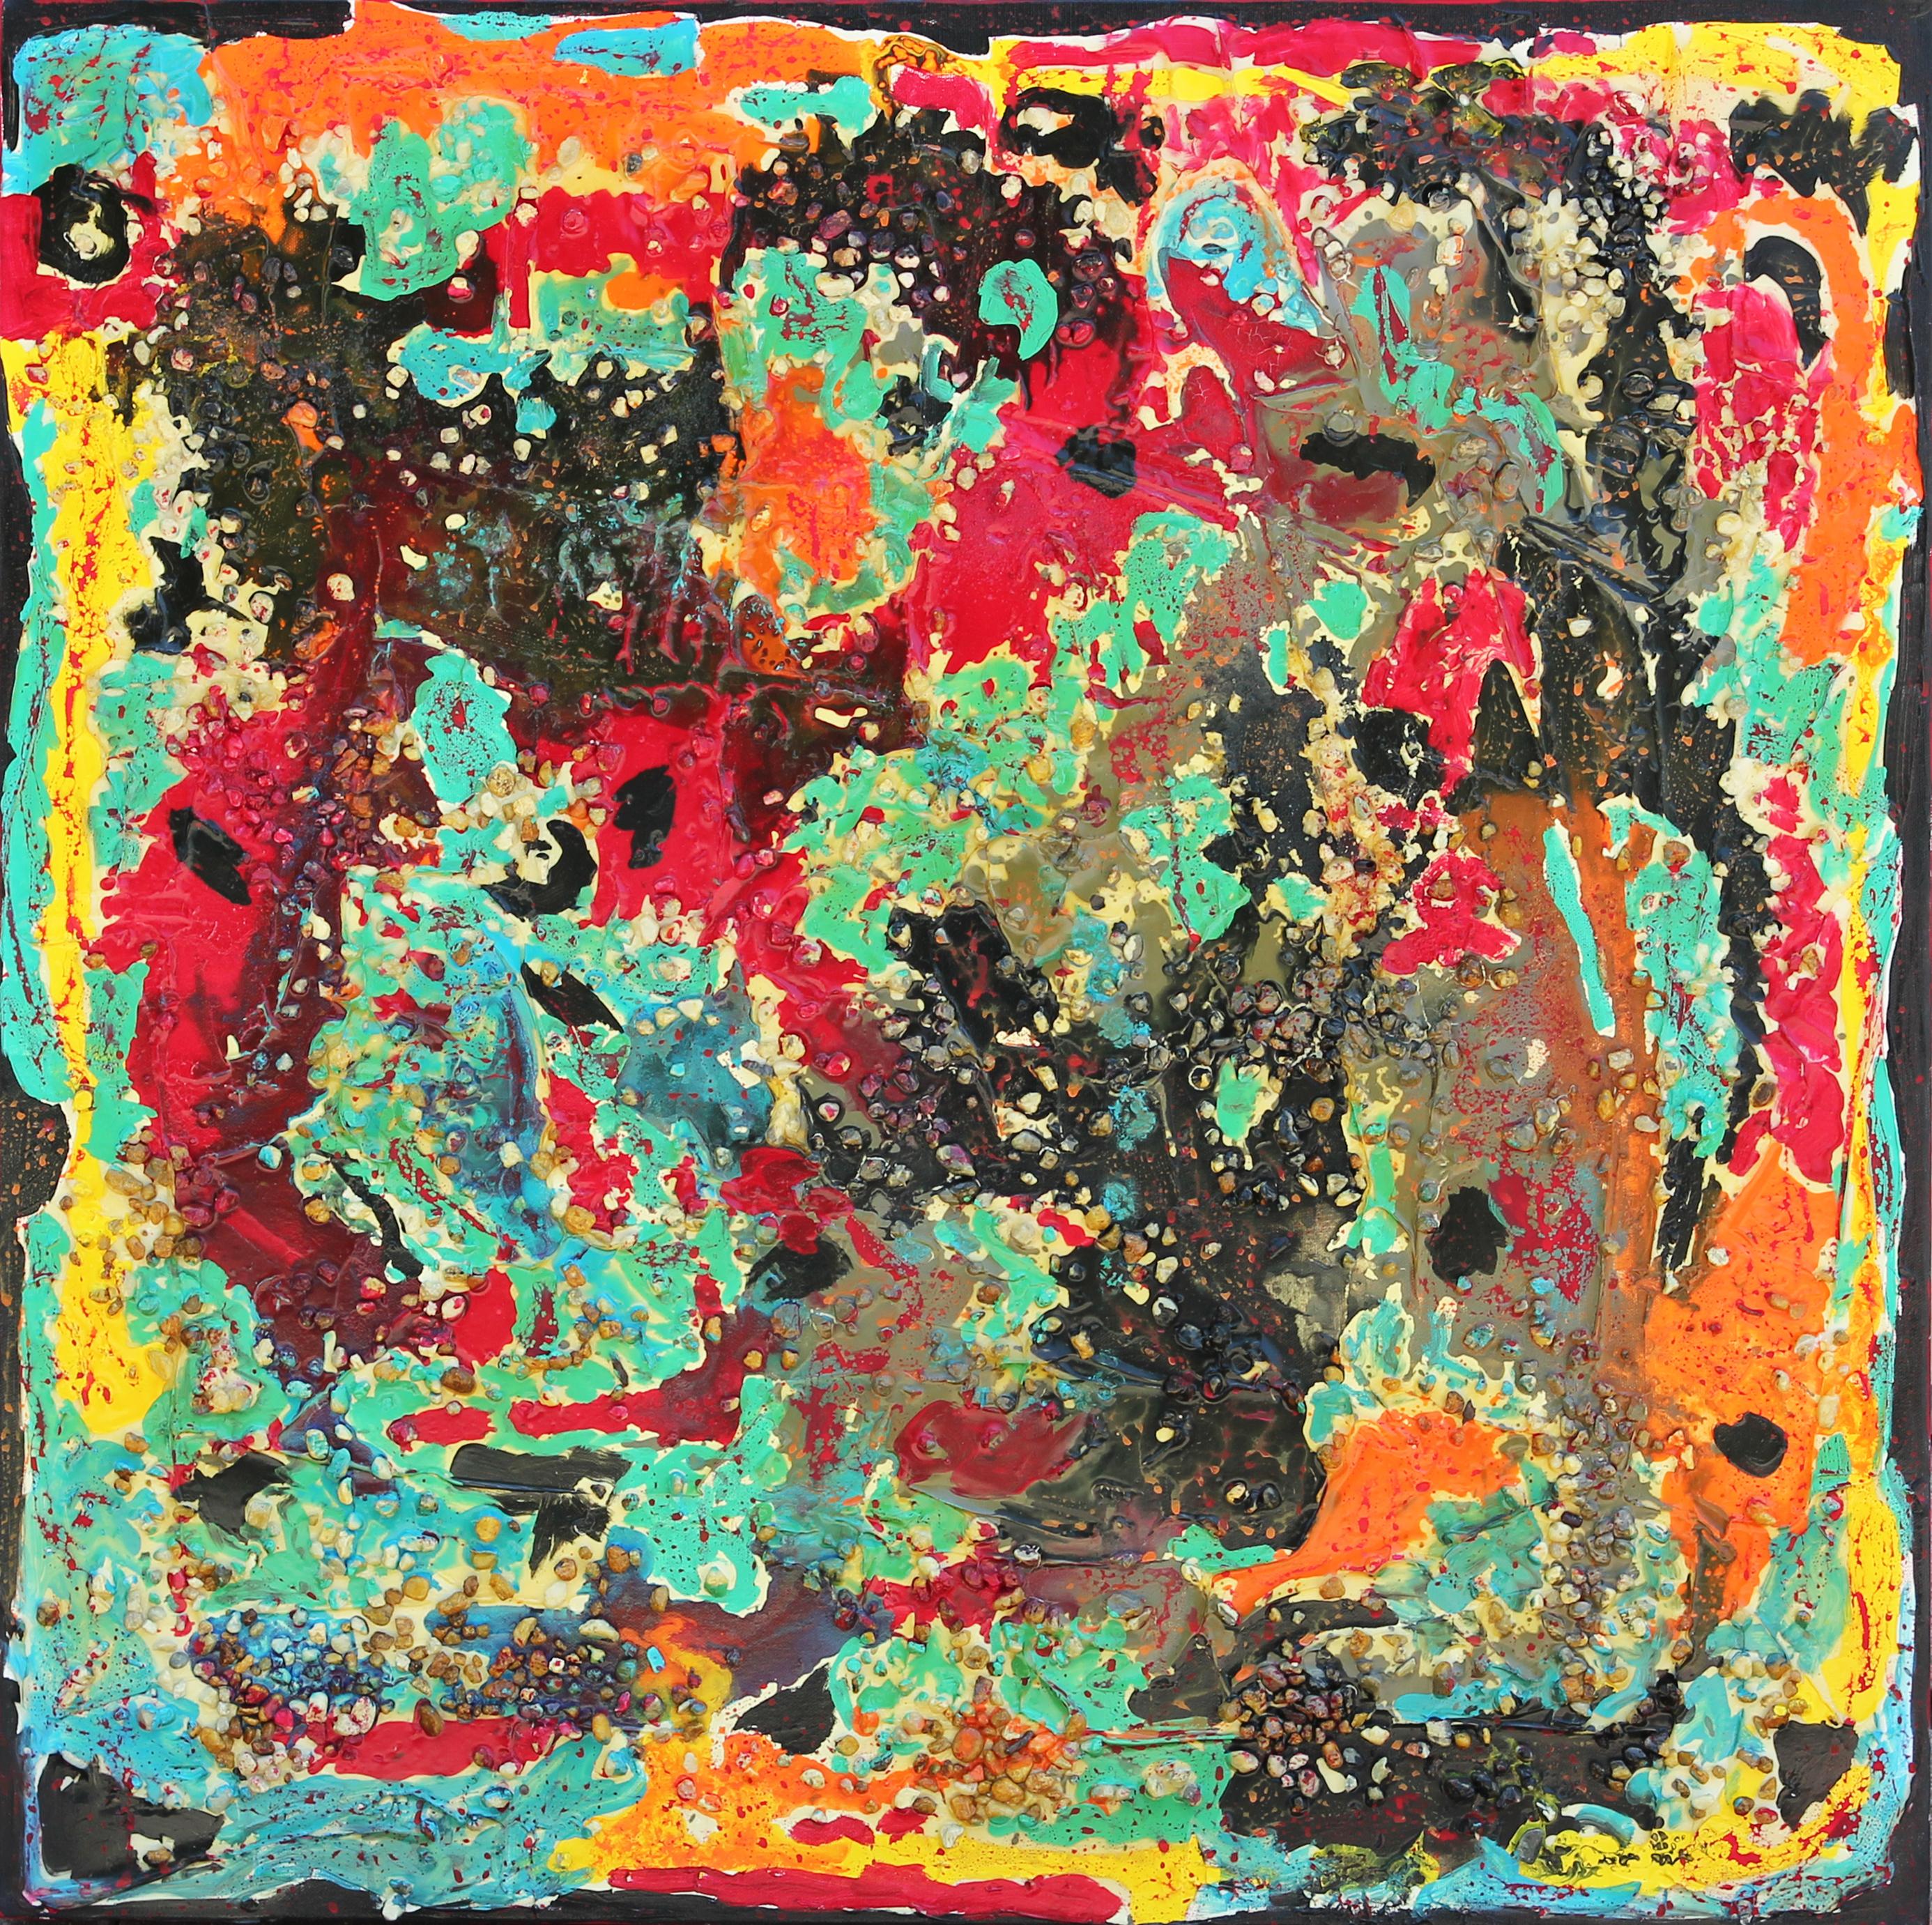 "Ramshackle" Green, Red, Turquoise, and Orange Abstract with Pebbles - Mixed Media Art by Paul Reeves